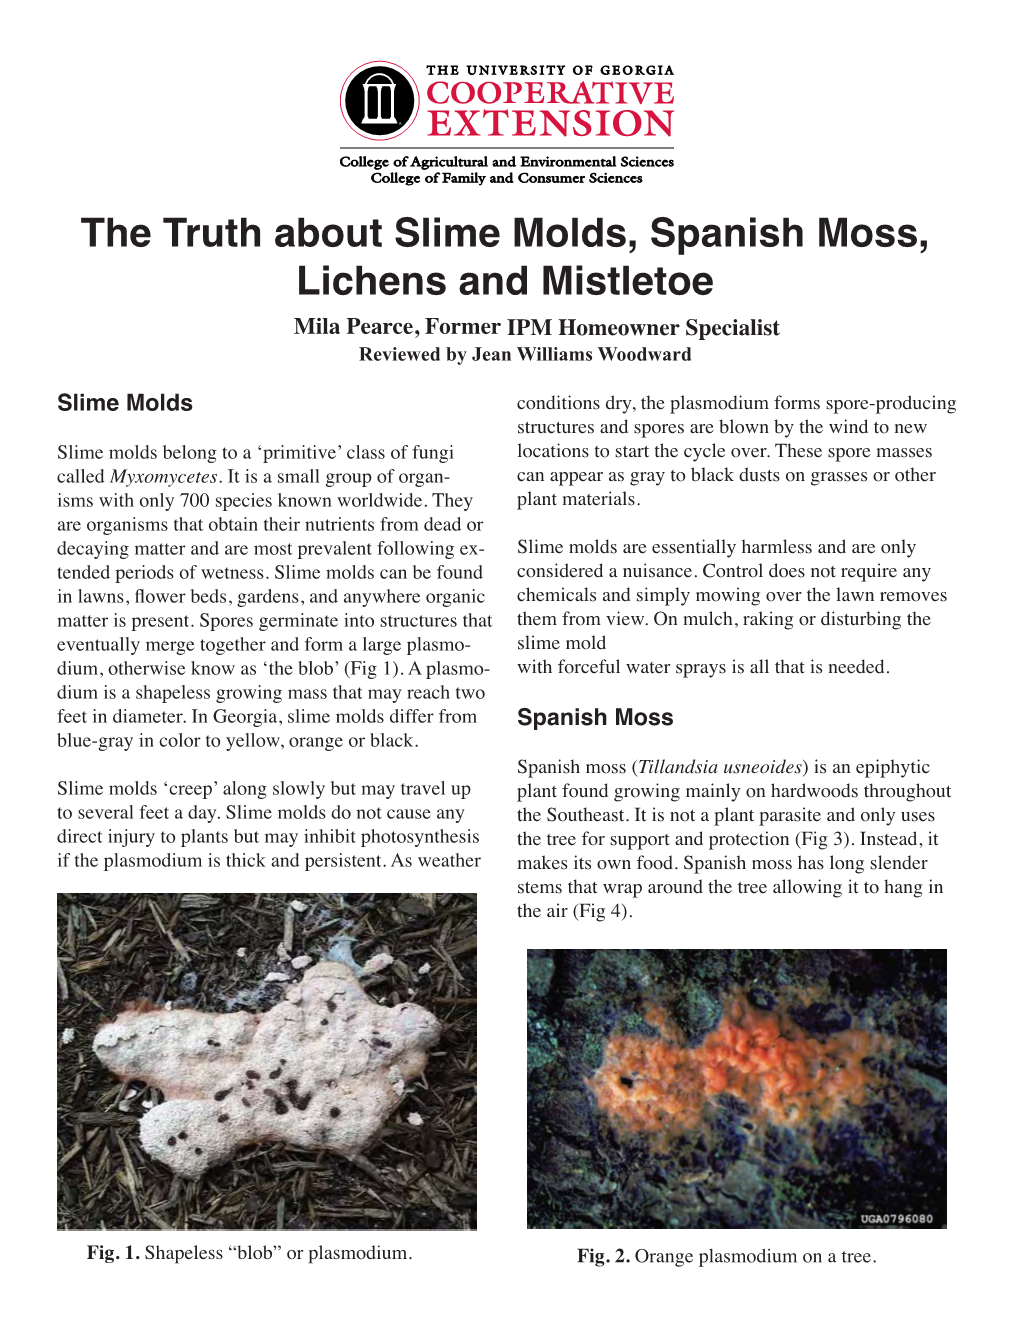 The Truth About Slime Molds, Spanish Moss, Lichens and Mistletoe Mila Pearce, Former IPM Homeowner Specialist Reviewed by Jean Williams Woodward